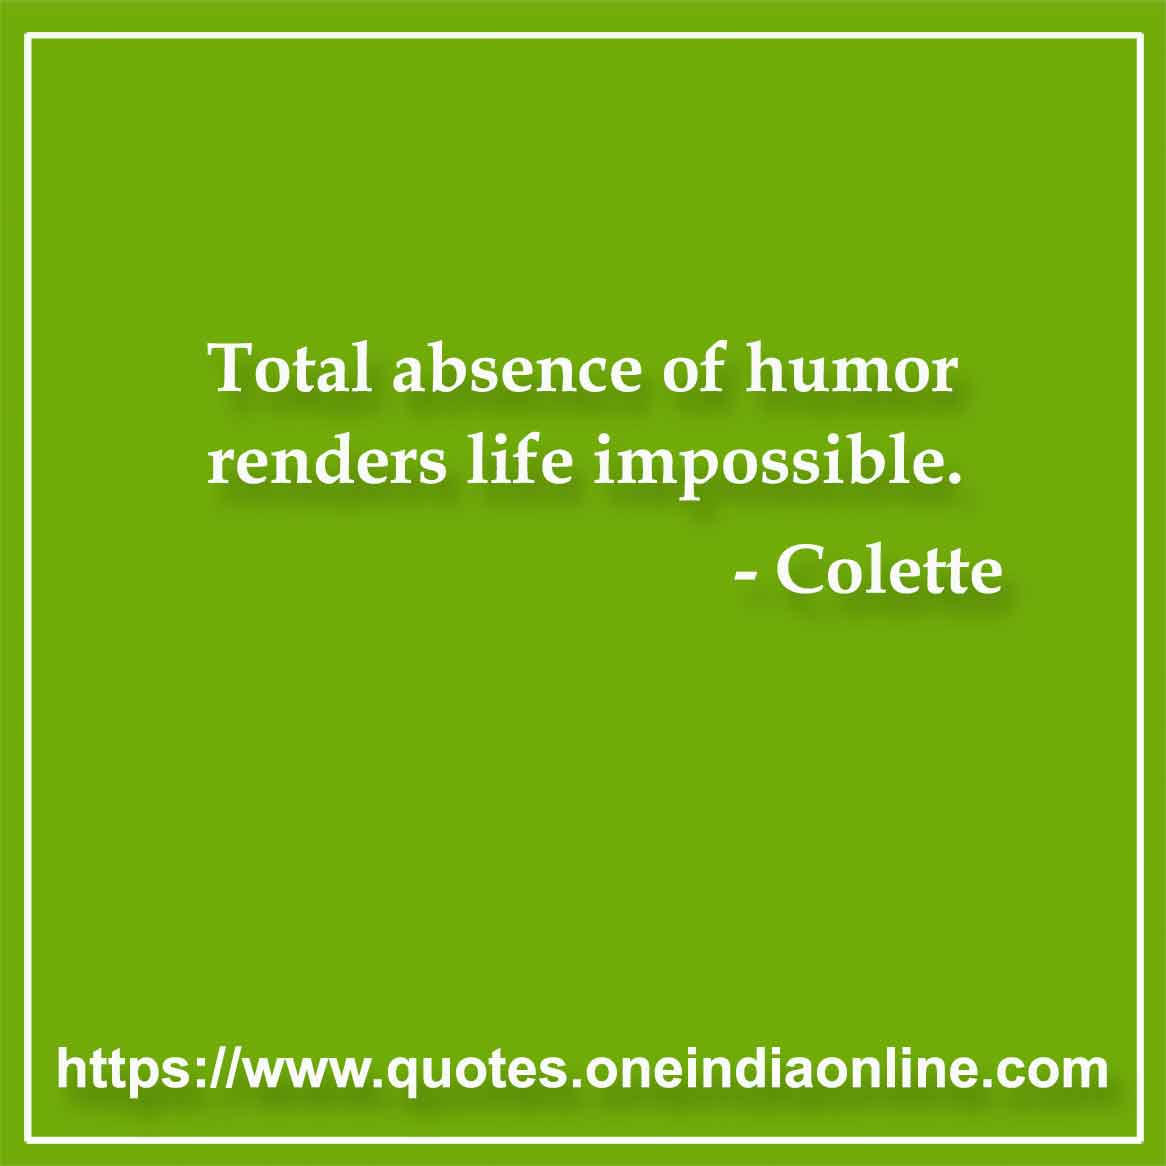 Total absence of humor renders life impossible.

- Laughter Quotes by Colette 